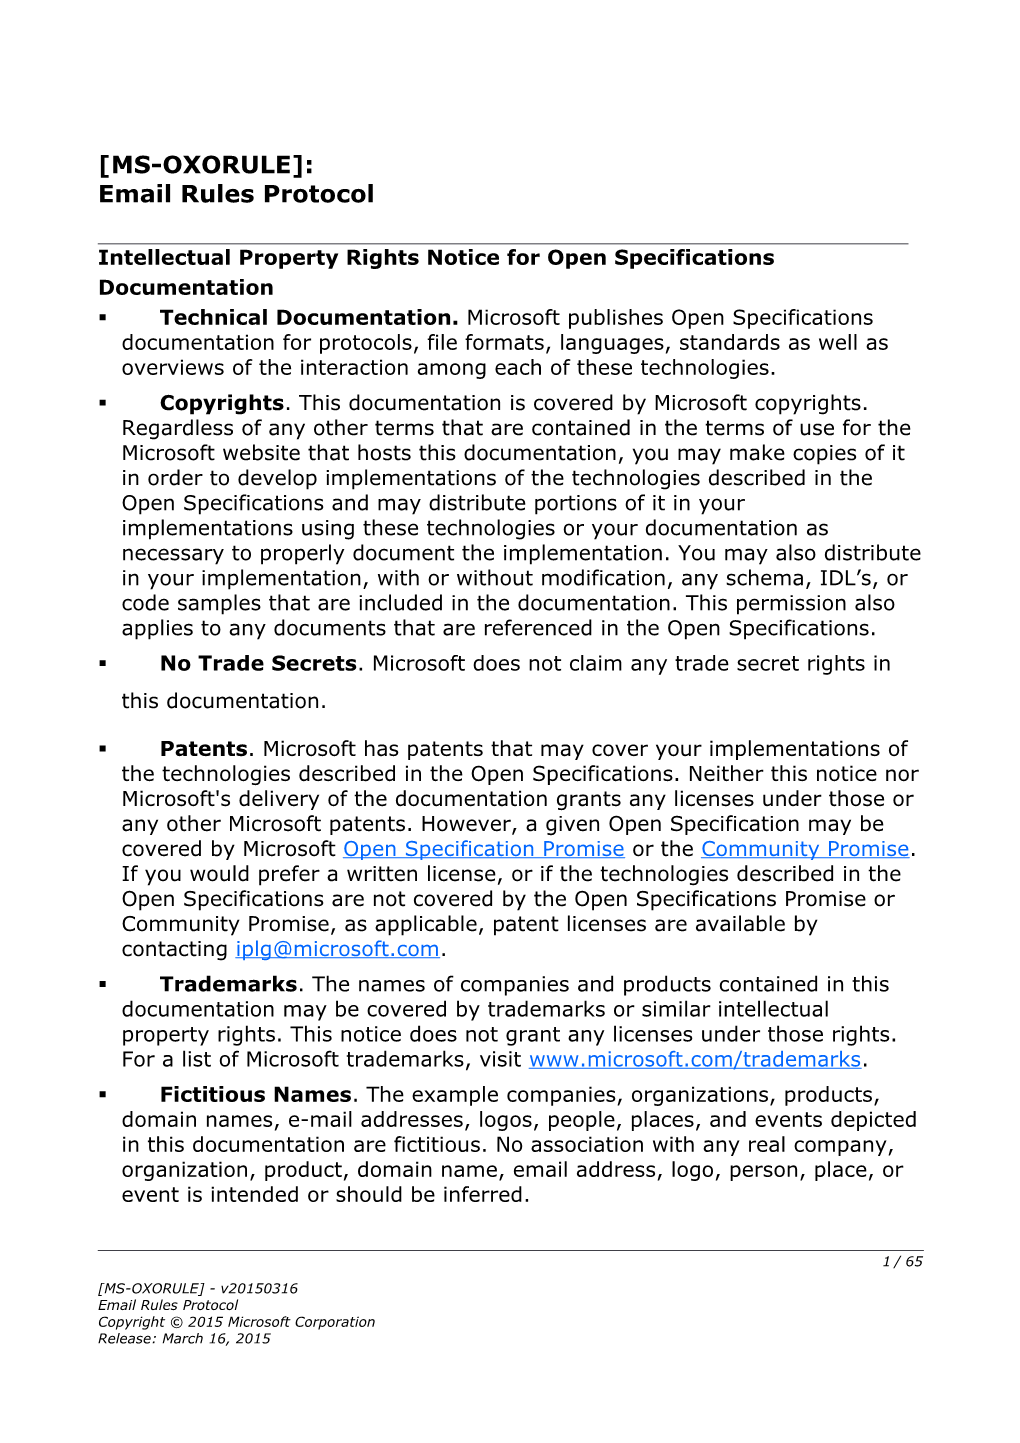 Intellectual Property Rights Notice for Open Specifications Documentation s55